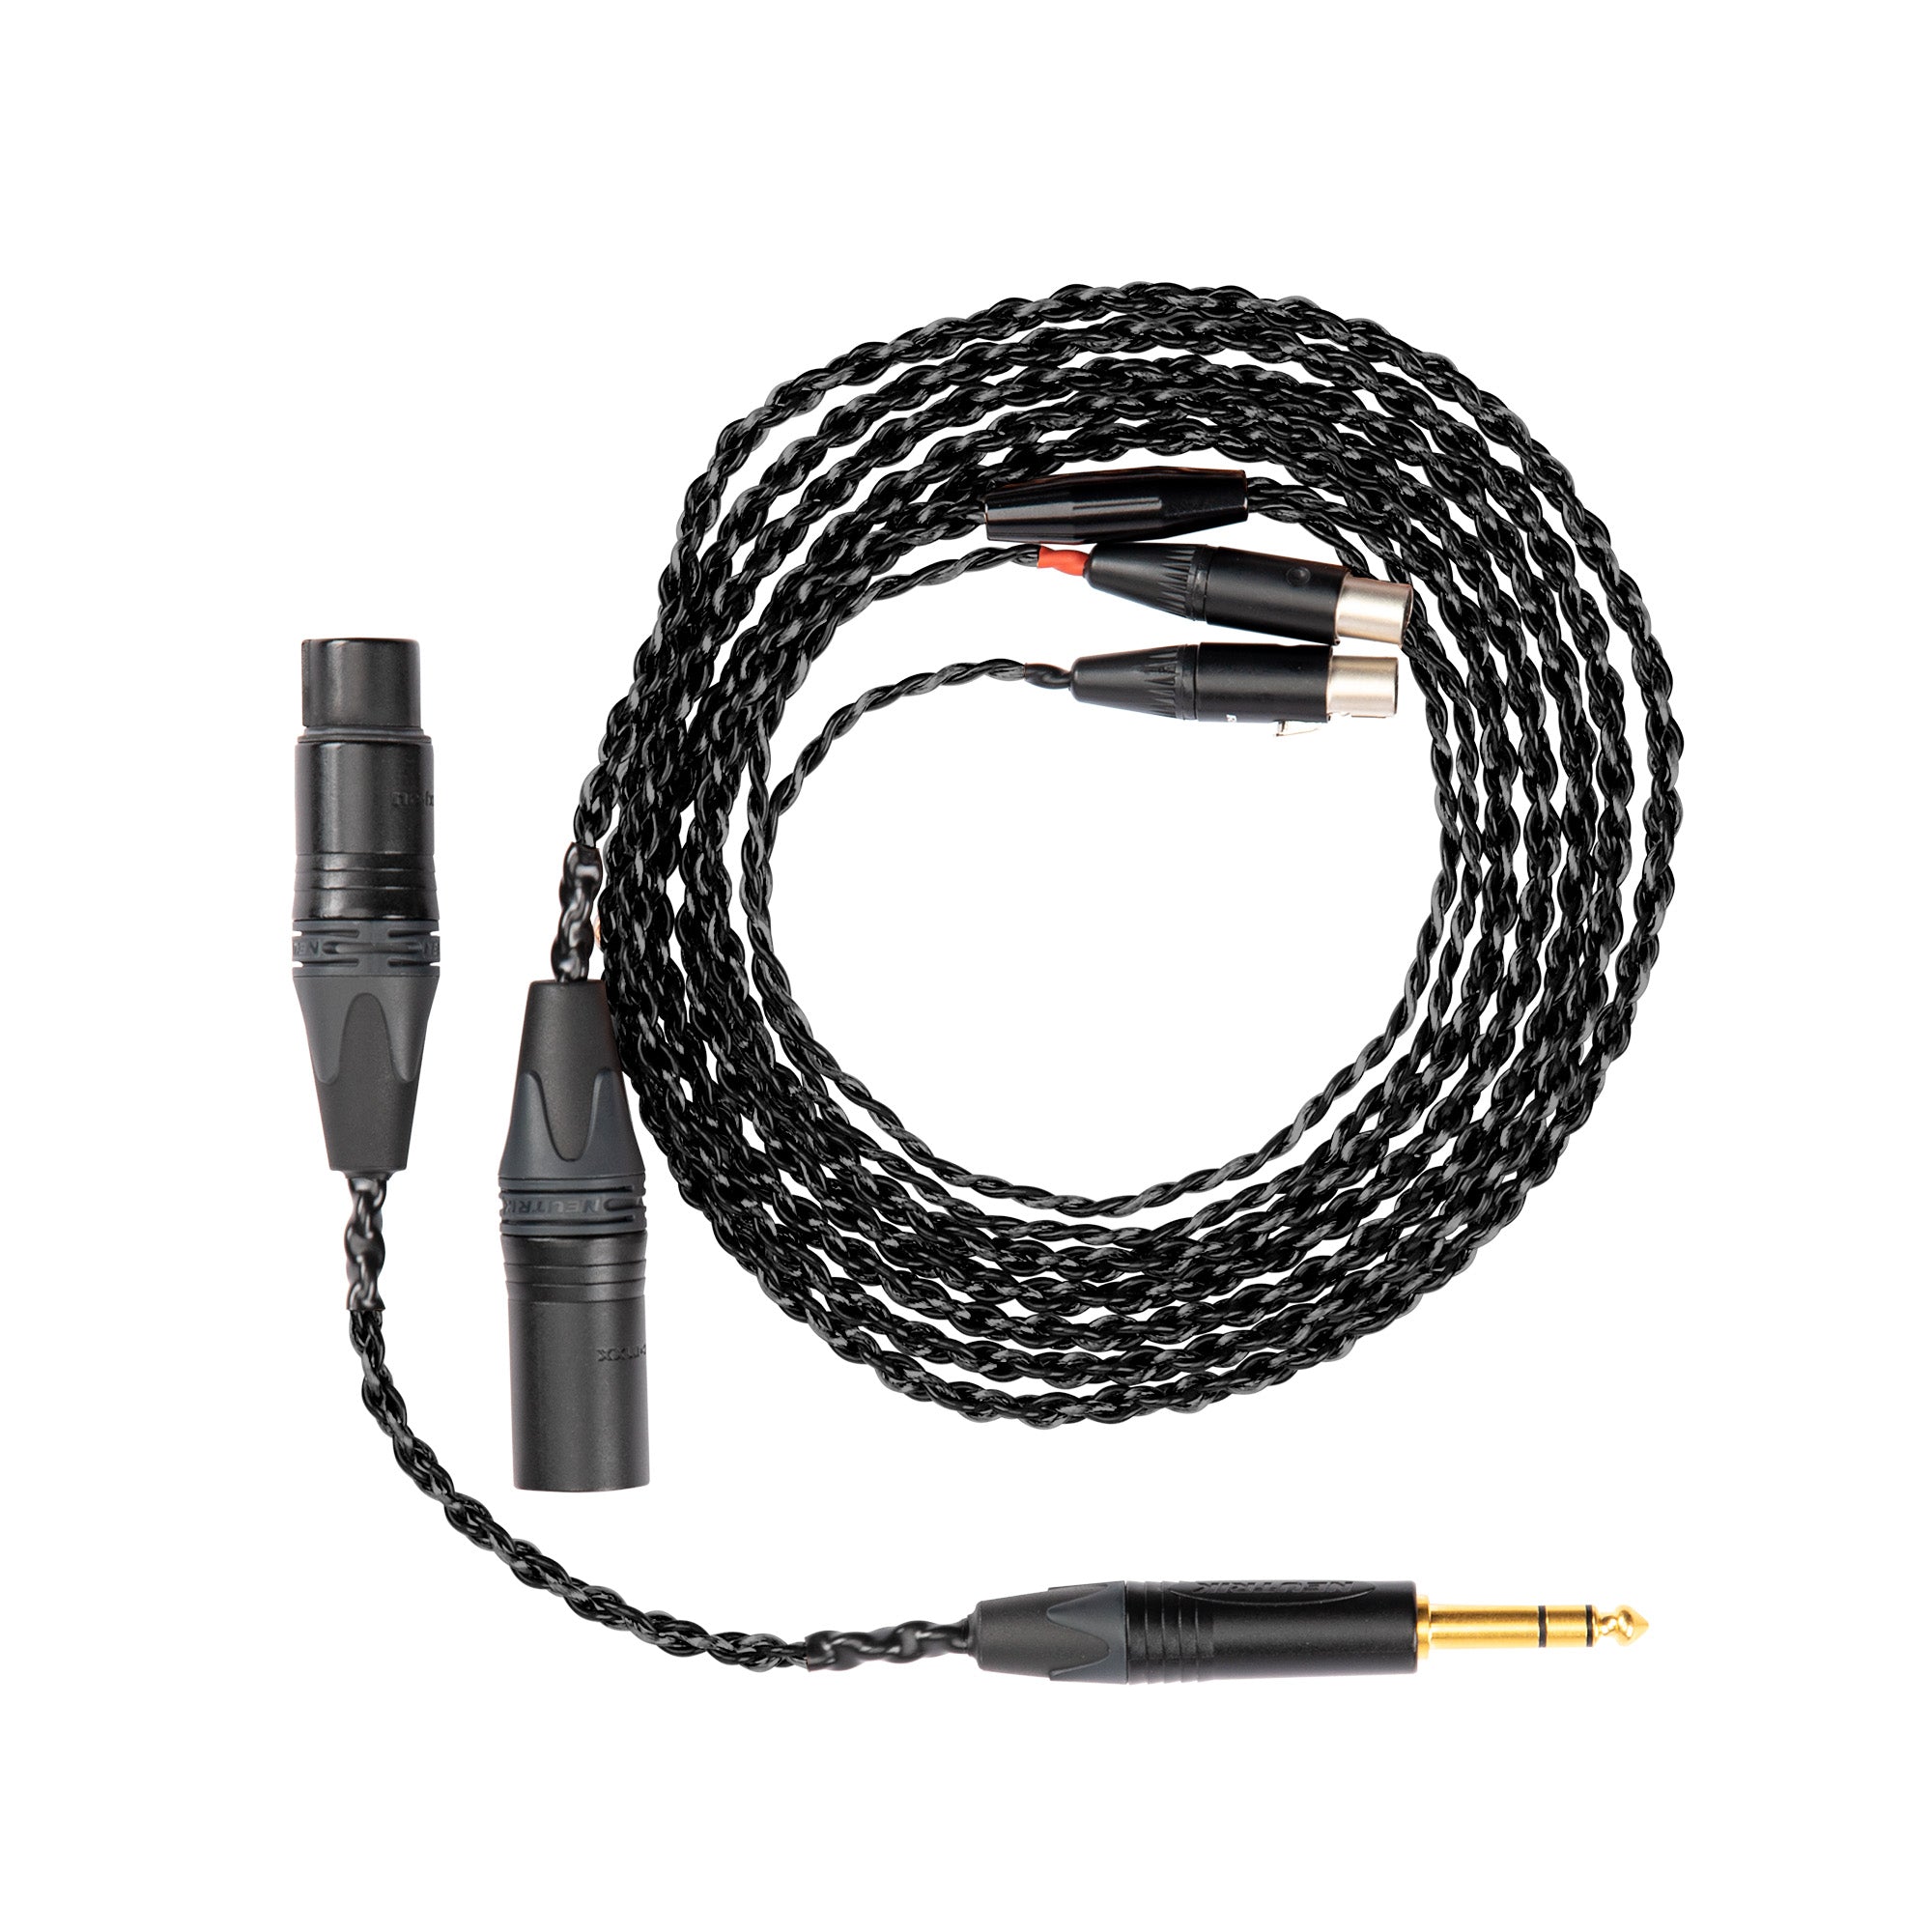 LCD Standard Combo Cable - Balanced XLR with 1/4